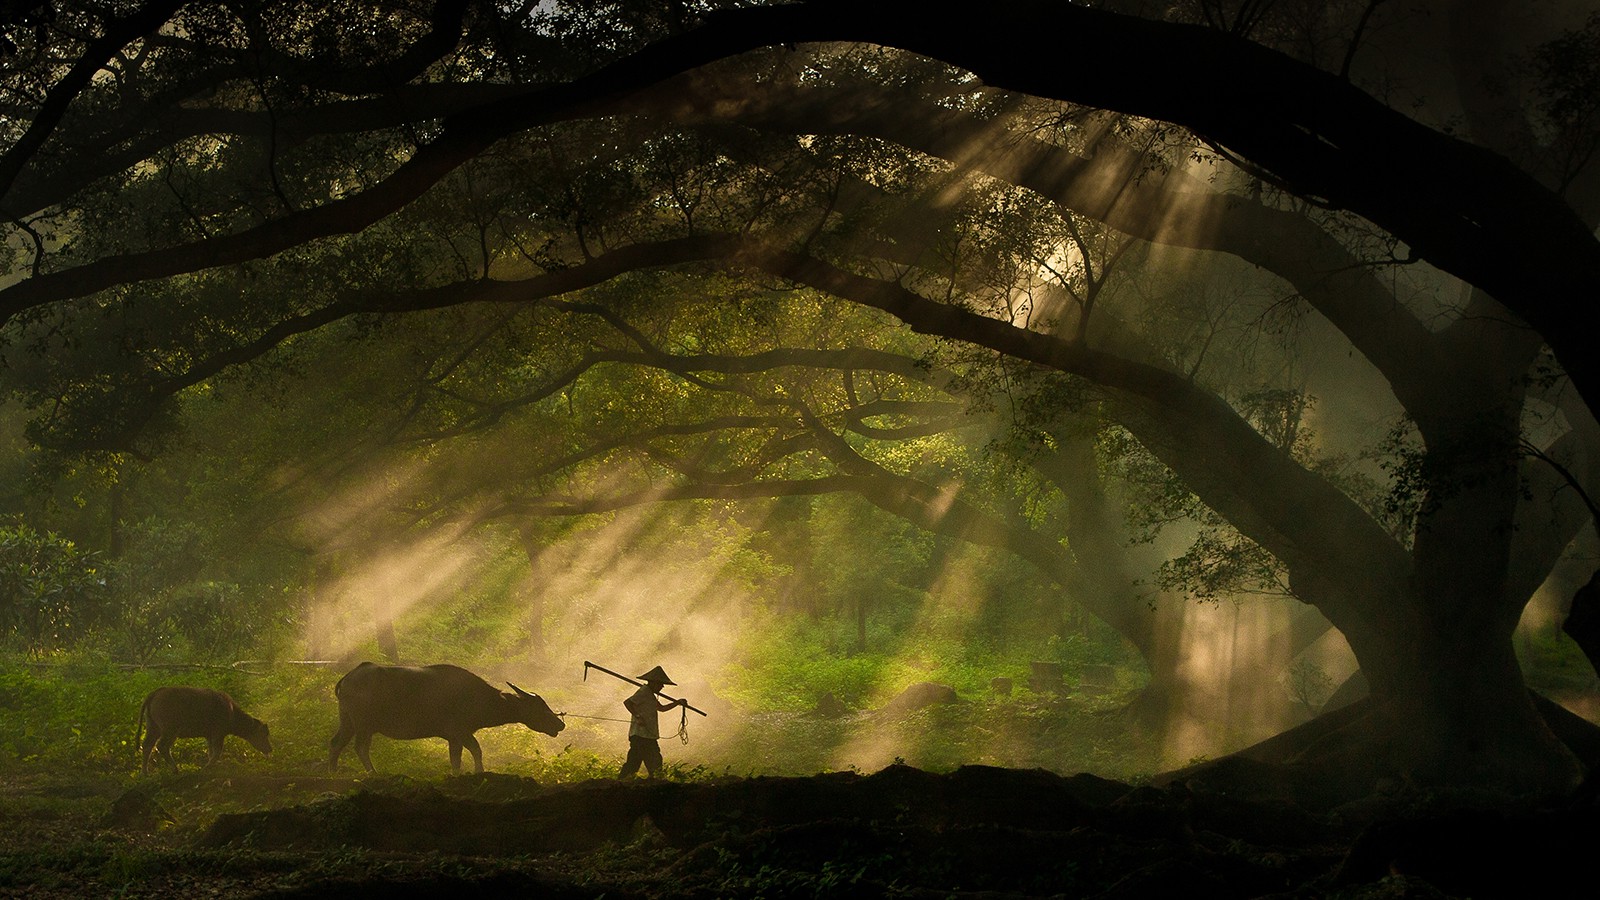 nature, Landscape, Trees, Forest, Branch, Men, Animals, Cows, Sun Rays, Moss, Silhouette, Shepherd, Photography, Sony Wallpaper